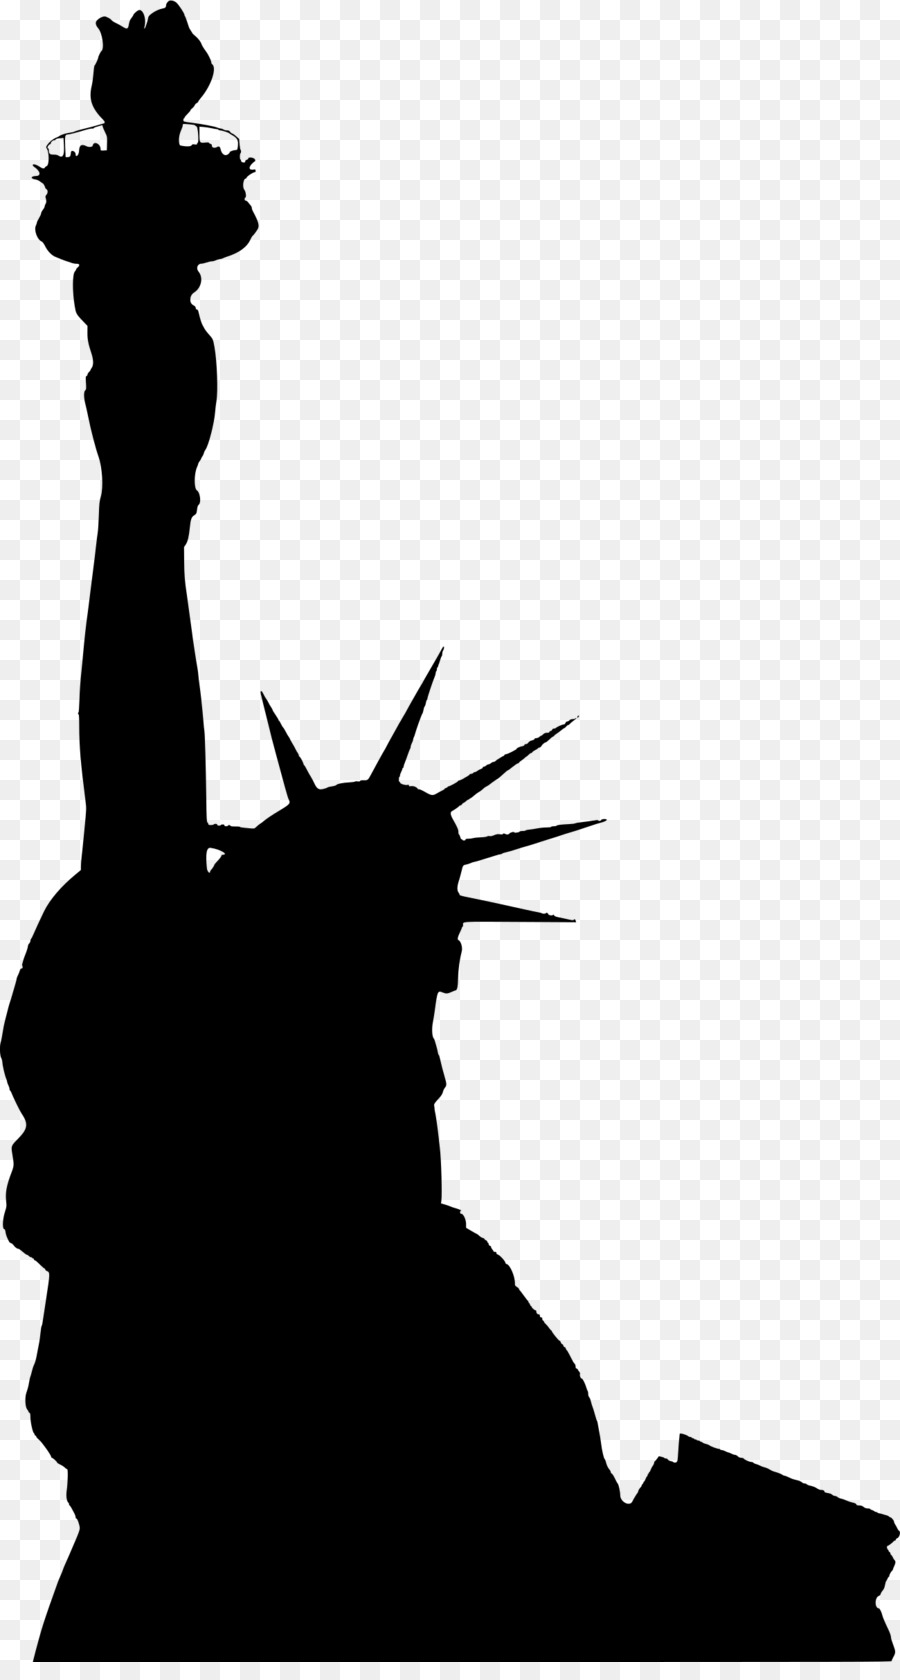 Statue of Liberty Silhouette Clip art - usa statue of liberty png download - 1300*2400 - Free Transparent Statue Of Liberty png Download.